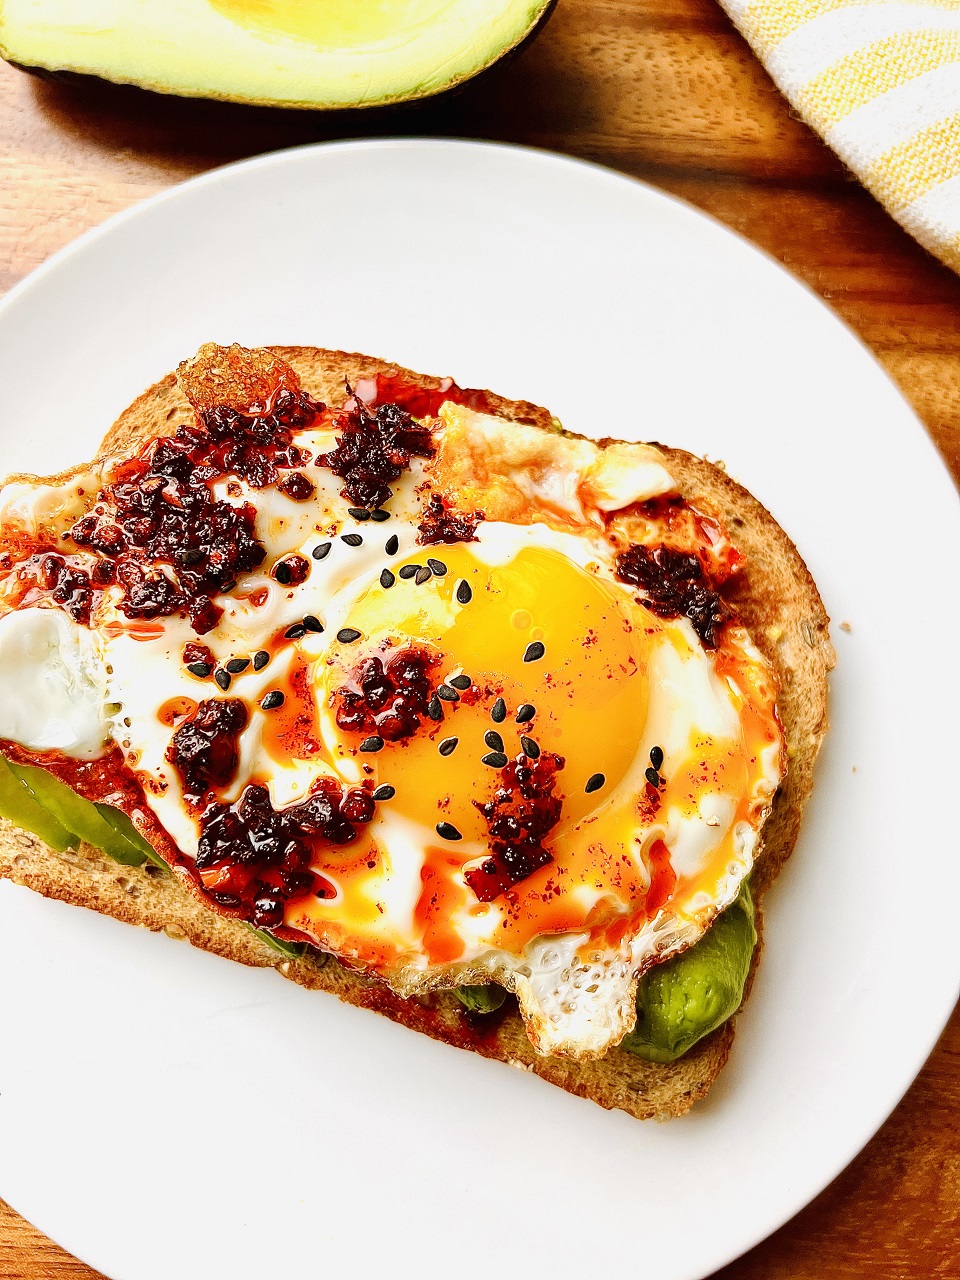 Avocado toast with sunny side up egg and chili oil